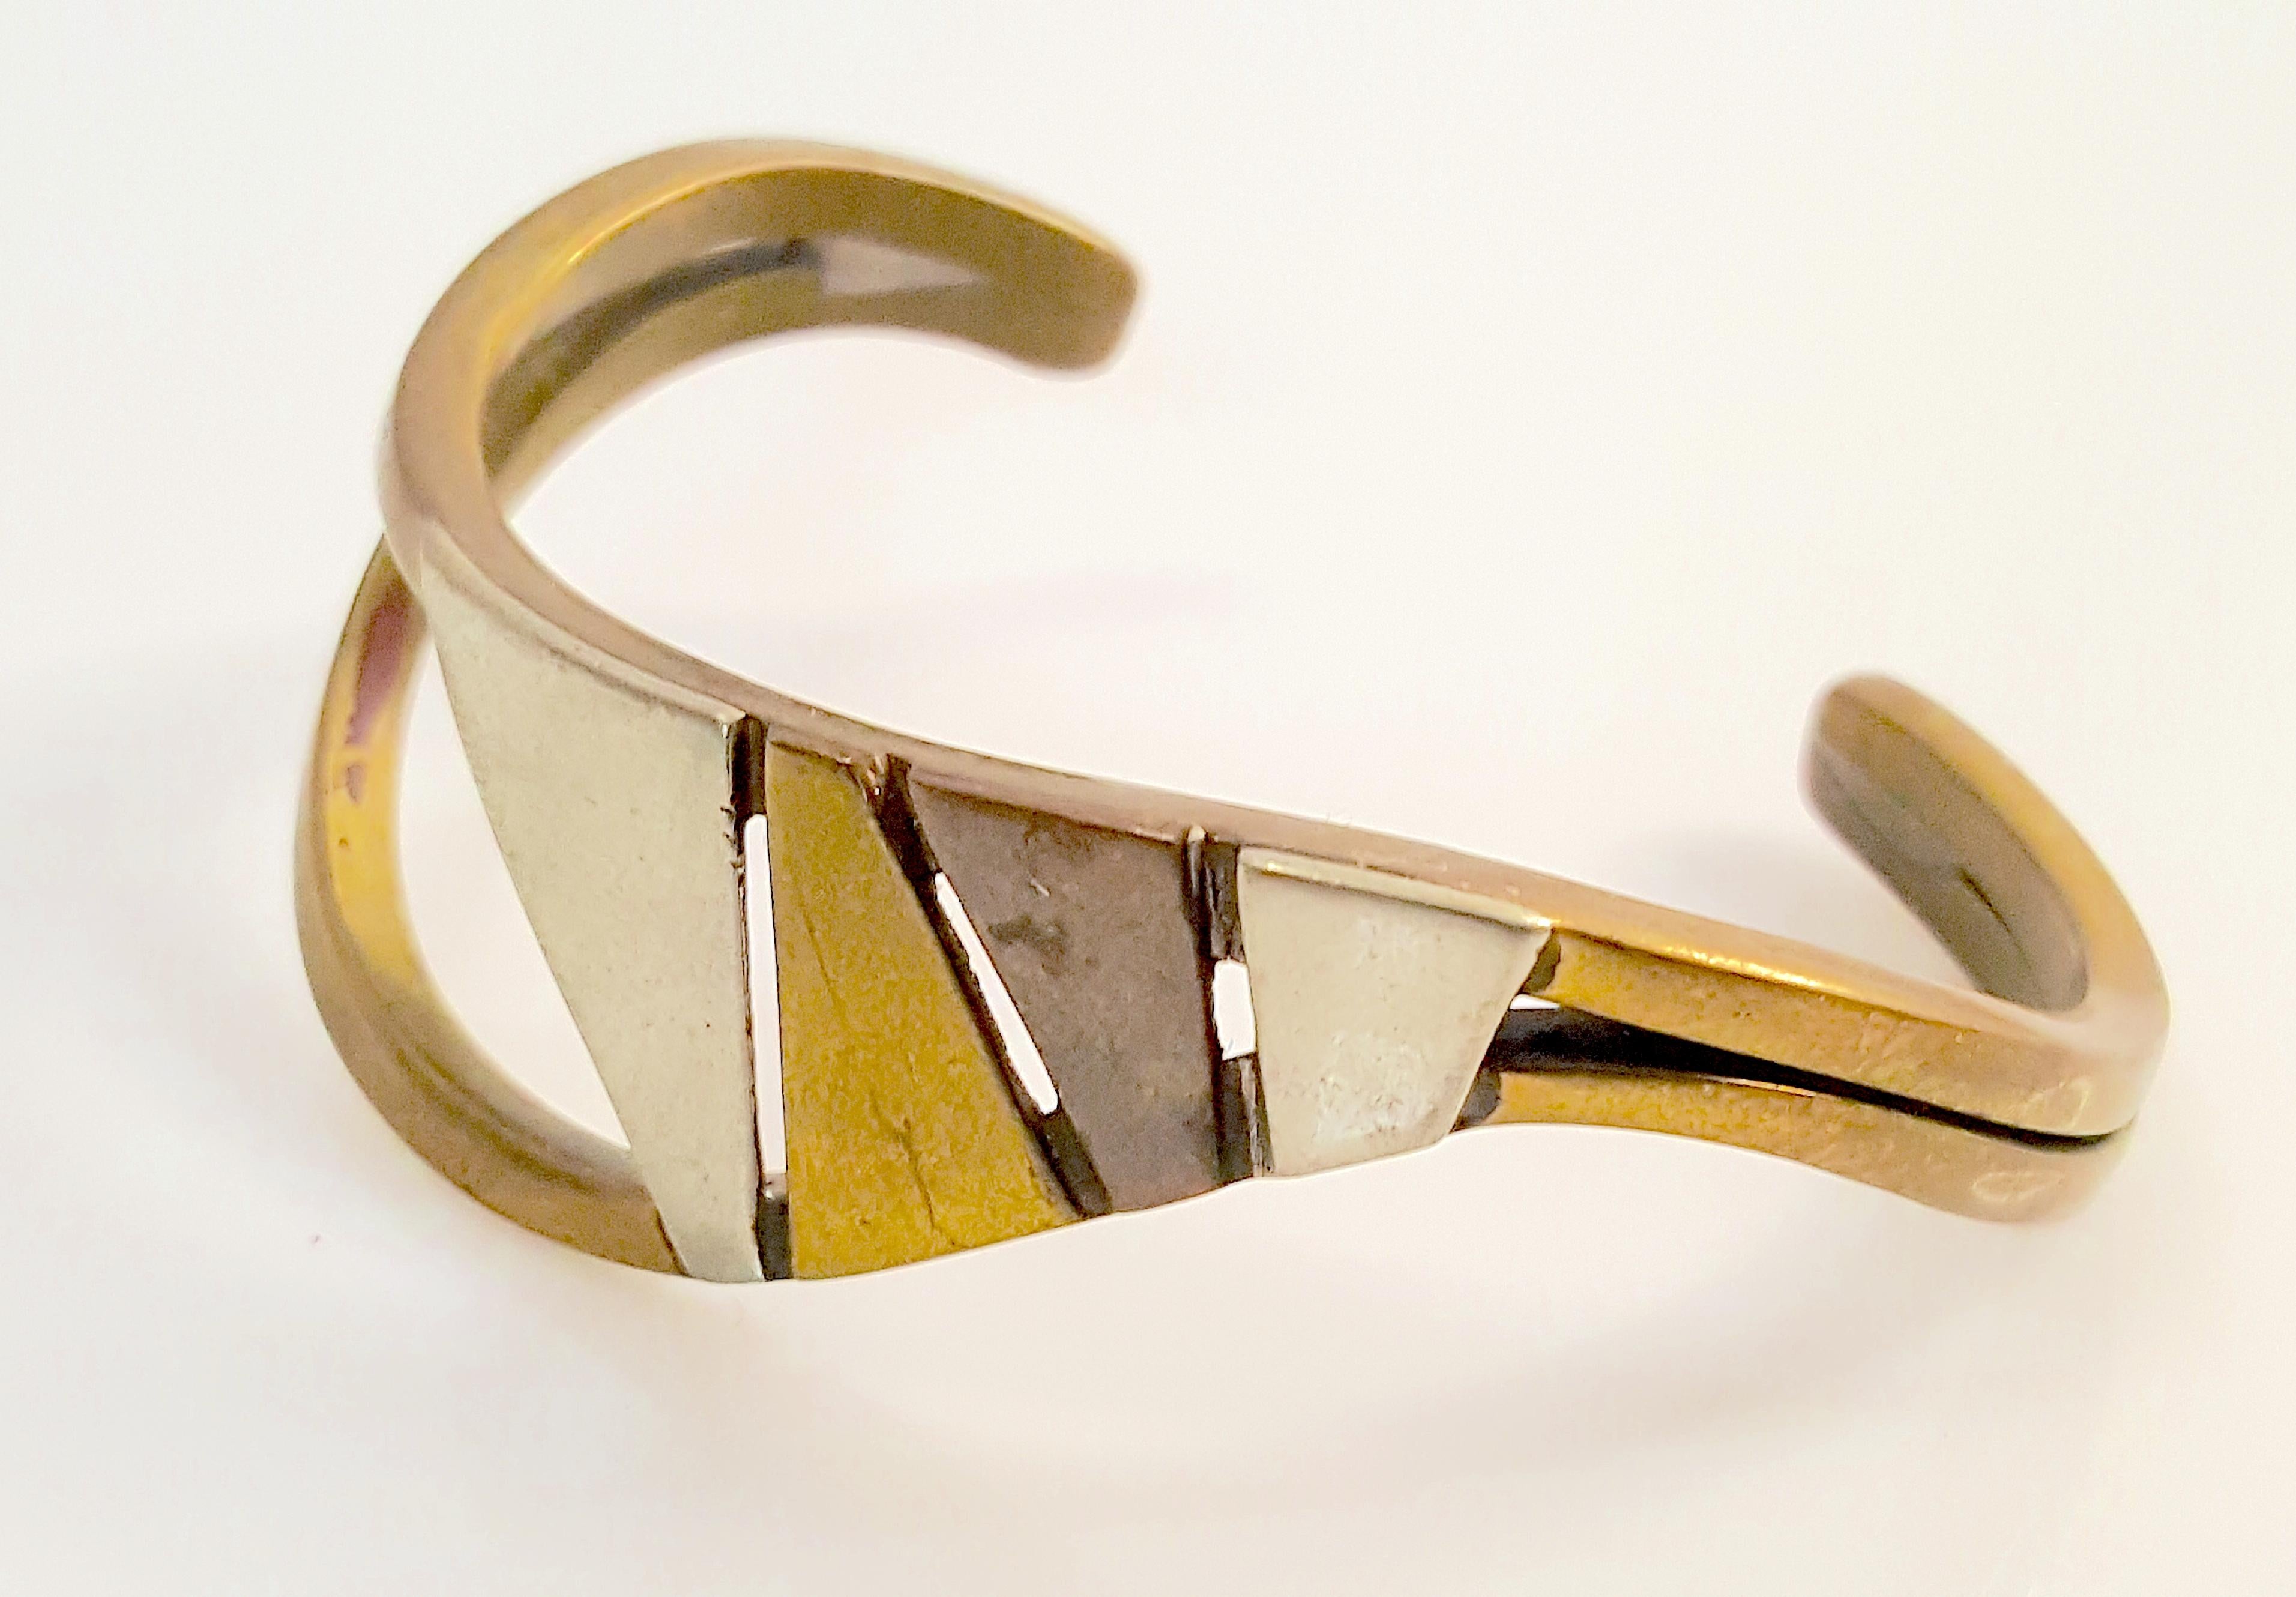 American Art Smith hand-crafted this modern asymmetrical cuff from roughly finished semi-precious layered metals in his early signature style including sculptural wires and gaps. On the top of the bracelet that displays Smith's dynamic artistry,